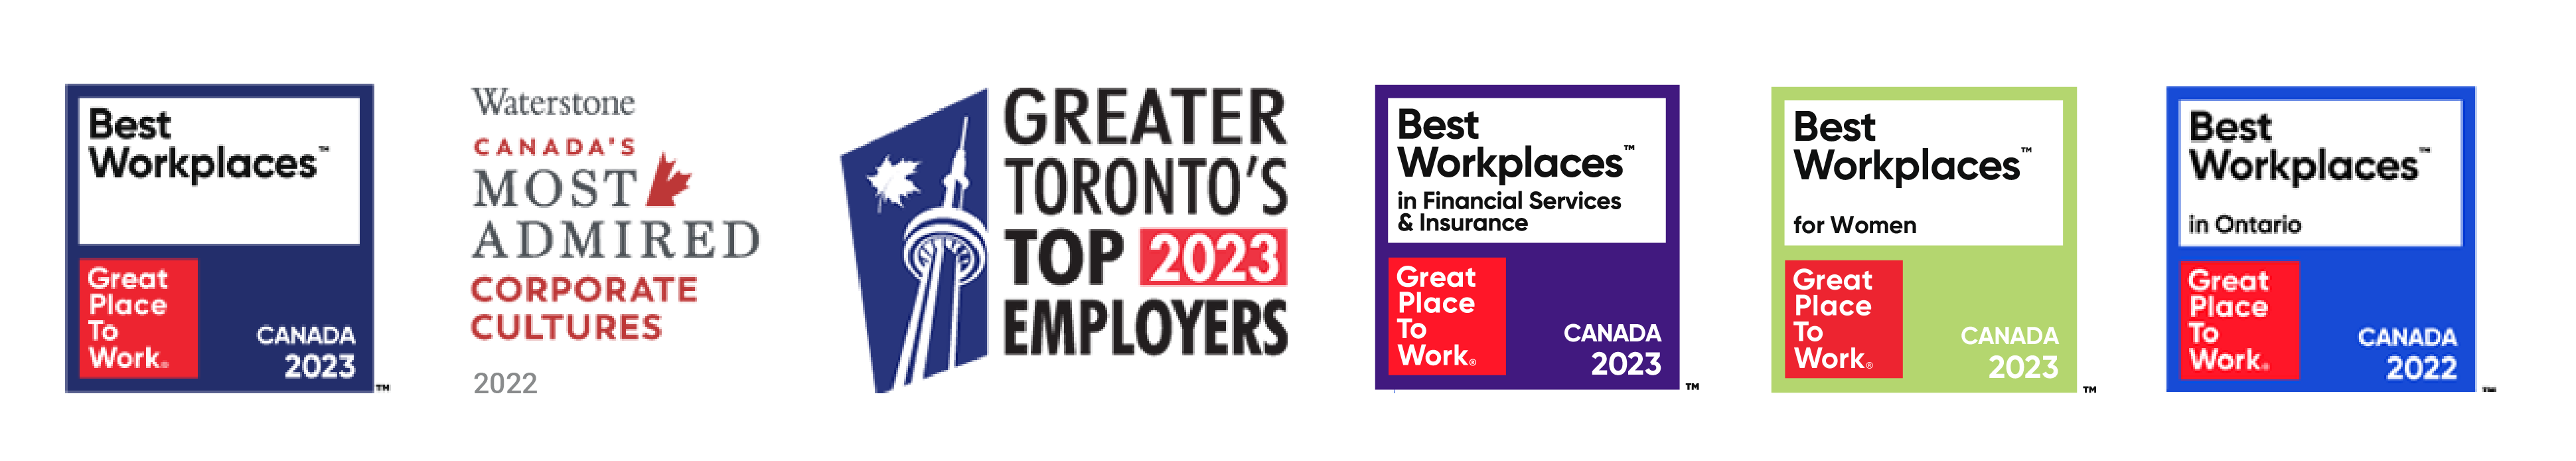 Logos for the  Best Workplaces - Great Place to Work Canada 2003, Canada's Most Admired Corporate Cultures 2022, Greater Toronto Top 2023 Employers, Best Workplaces in Financial Services & Insurance - Great Place to Work Canada 2023. Best Workplaces for Women - Great Place to Work Canada 2023. Best Workplaces in Ontario - Great Place to Work 2022.